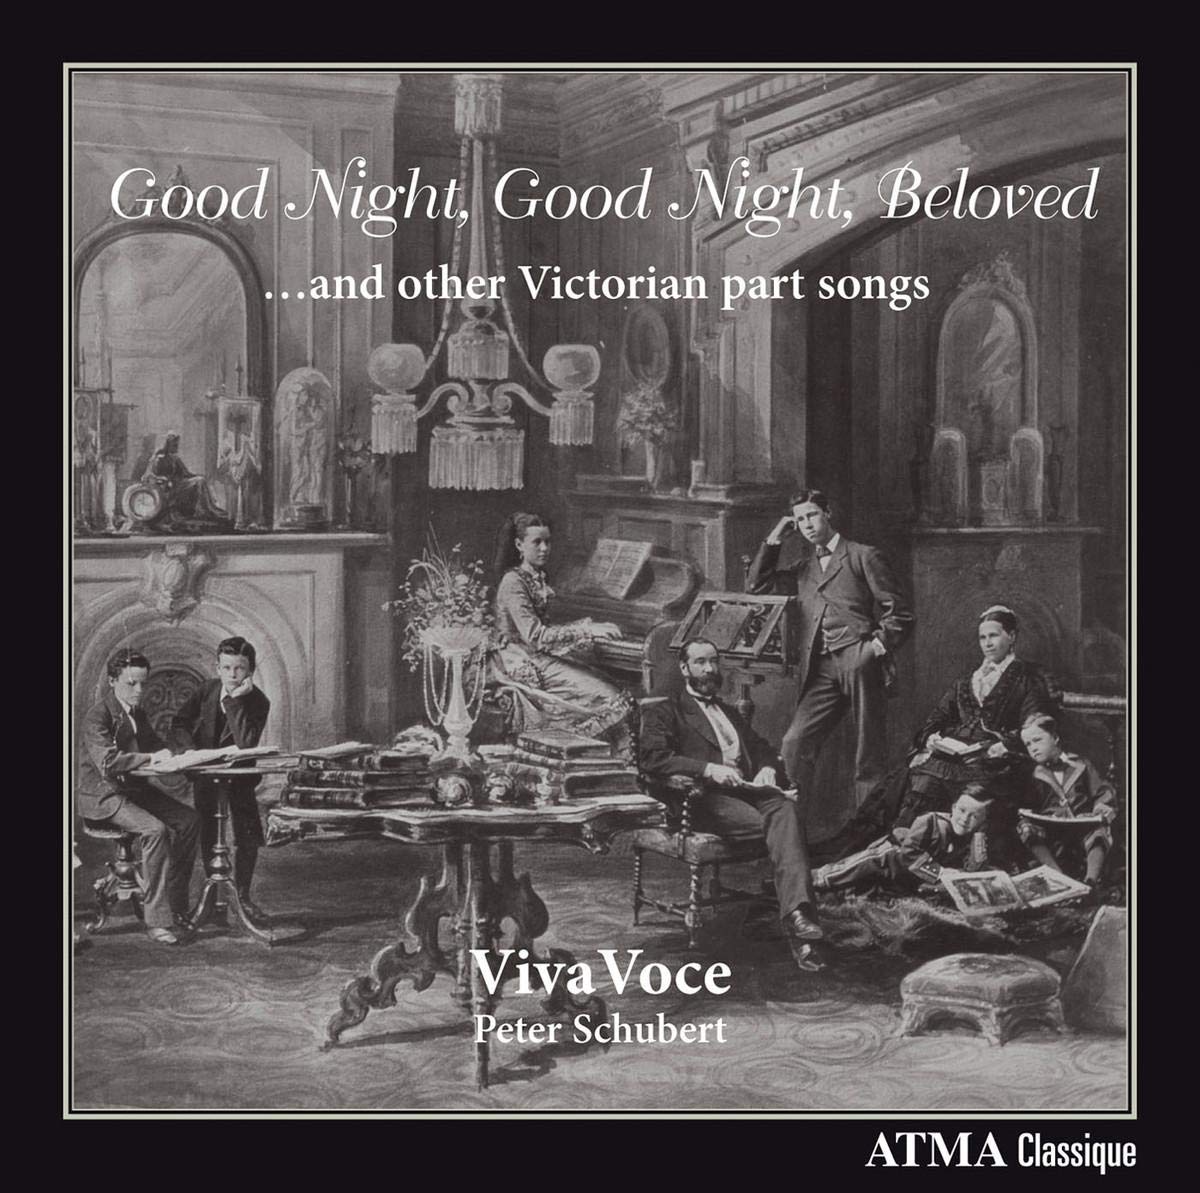 Good Night, Good Night, Beloved! and other Victorian Era Part Songs: Viva Voce